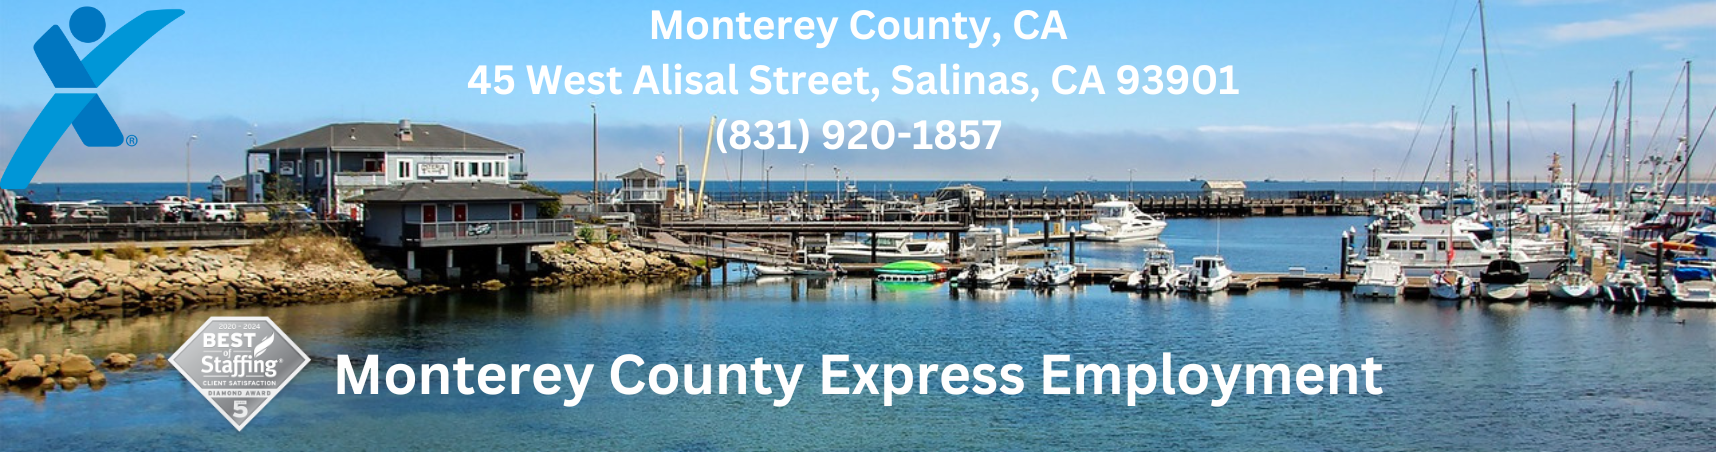 Monterey County Express Employment Banner_Boats